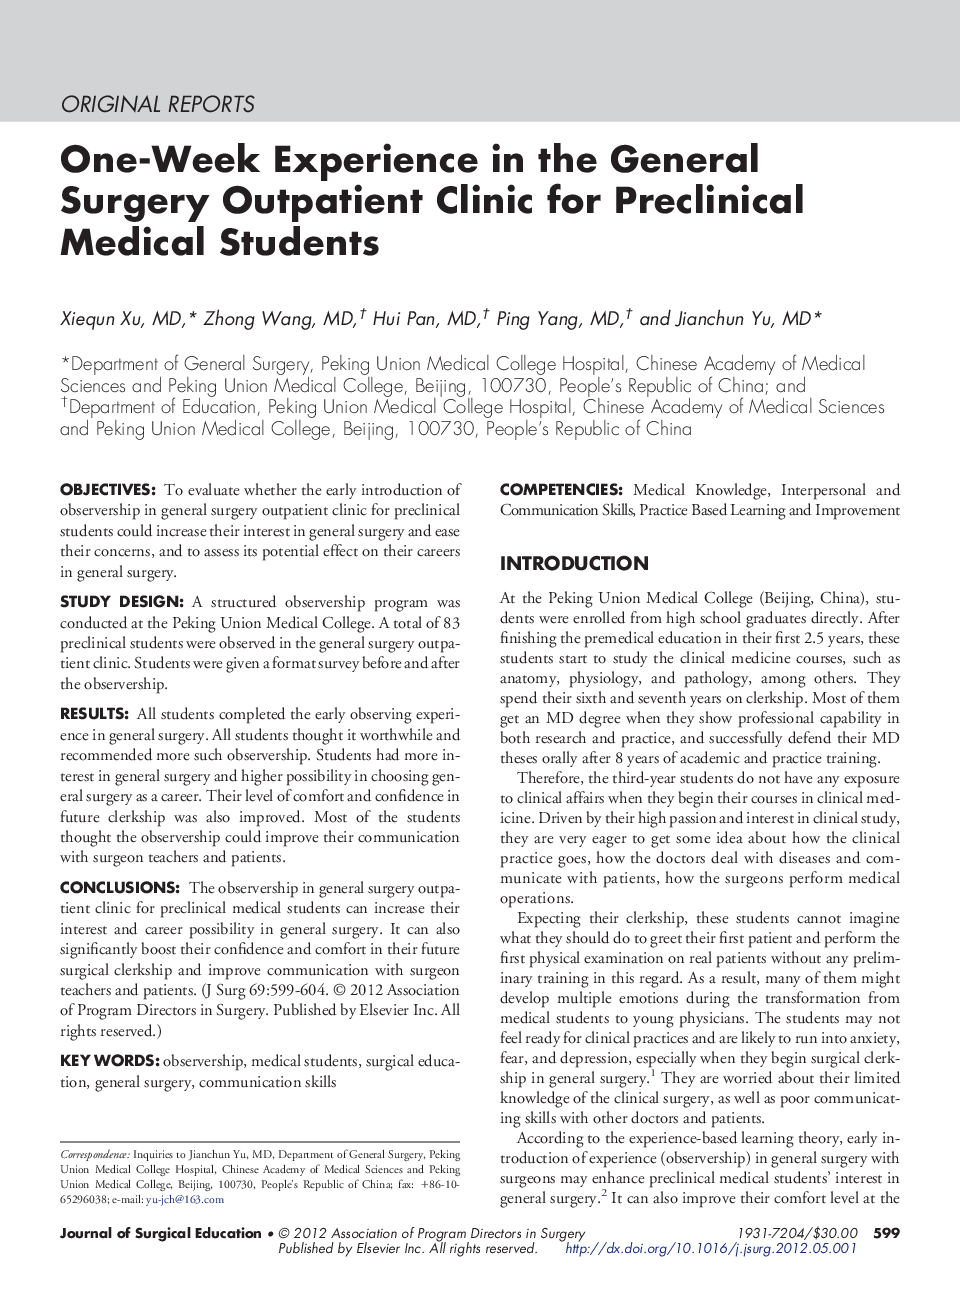 One-Week Experience in the General Surgery Outpatient Clinic for Preclinical Medical Students